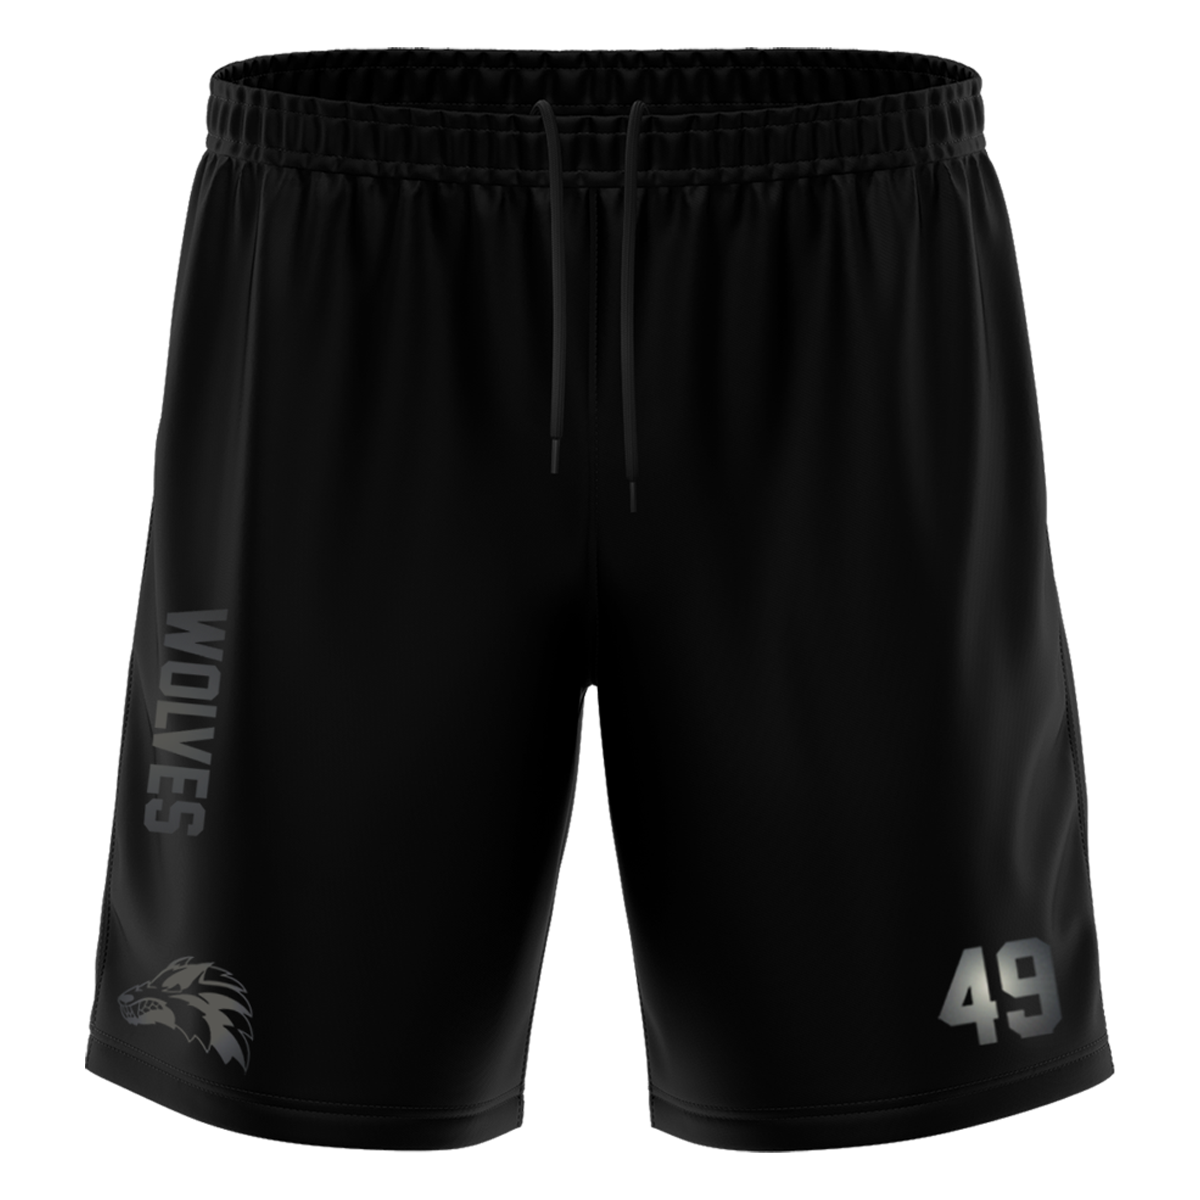 Wolves "Blackline" Training Short with Playernumber or Initials